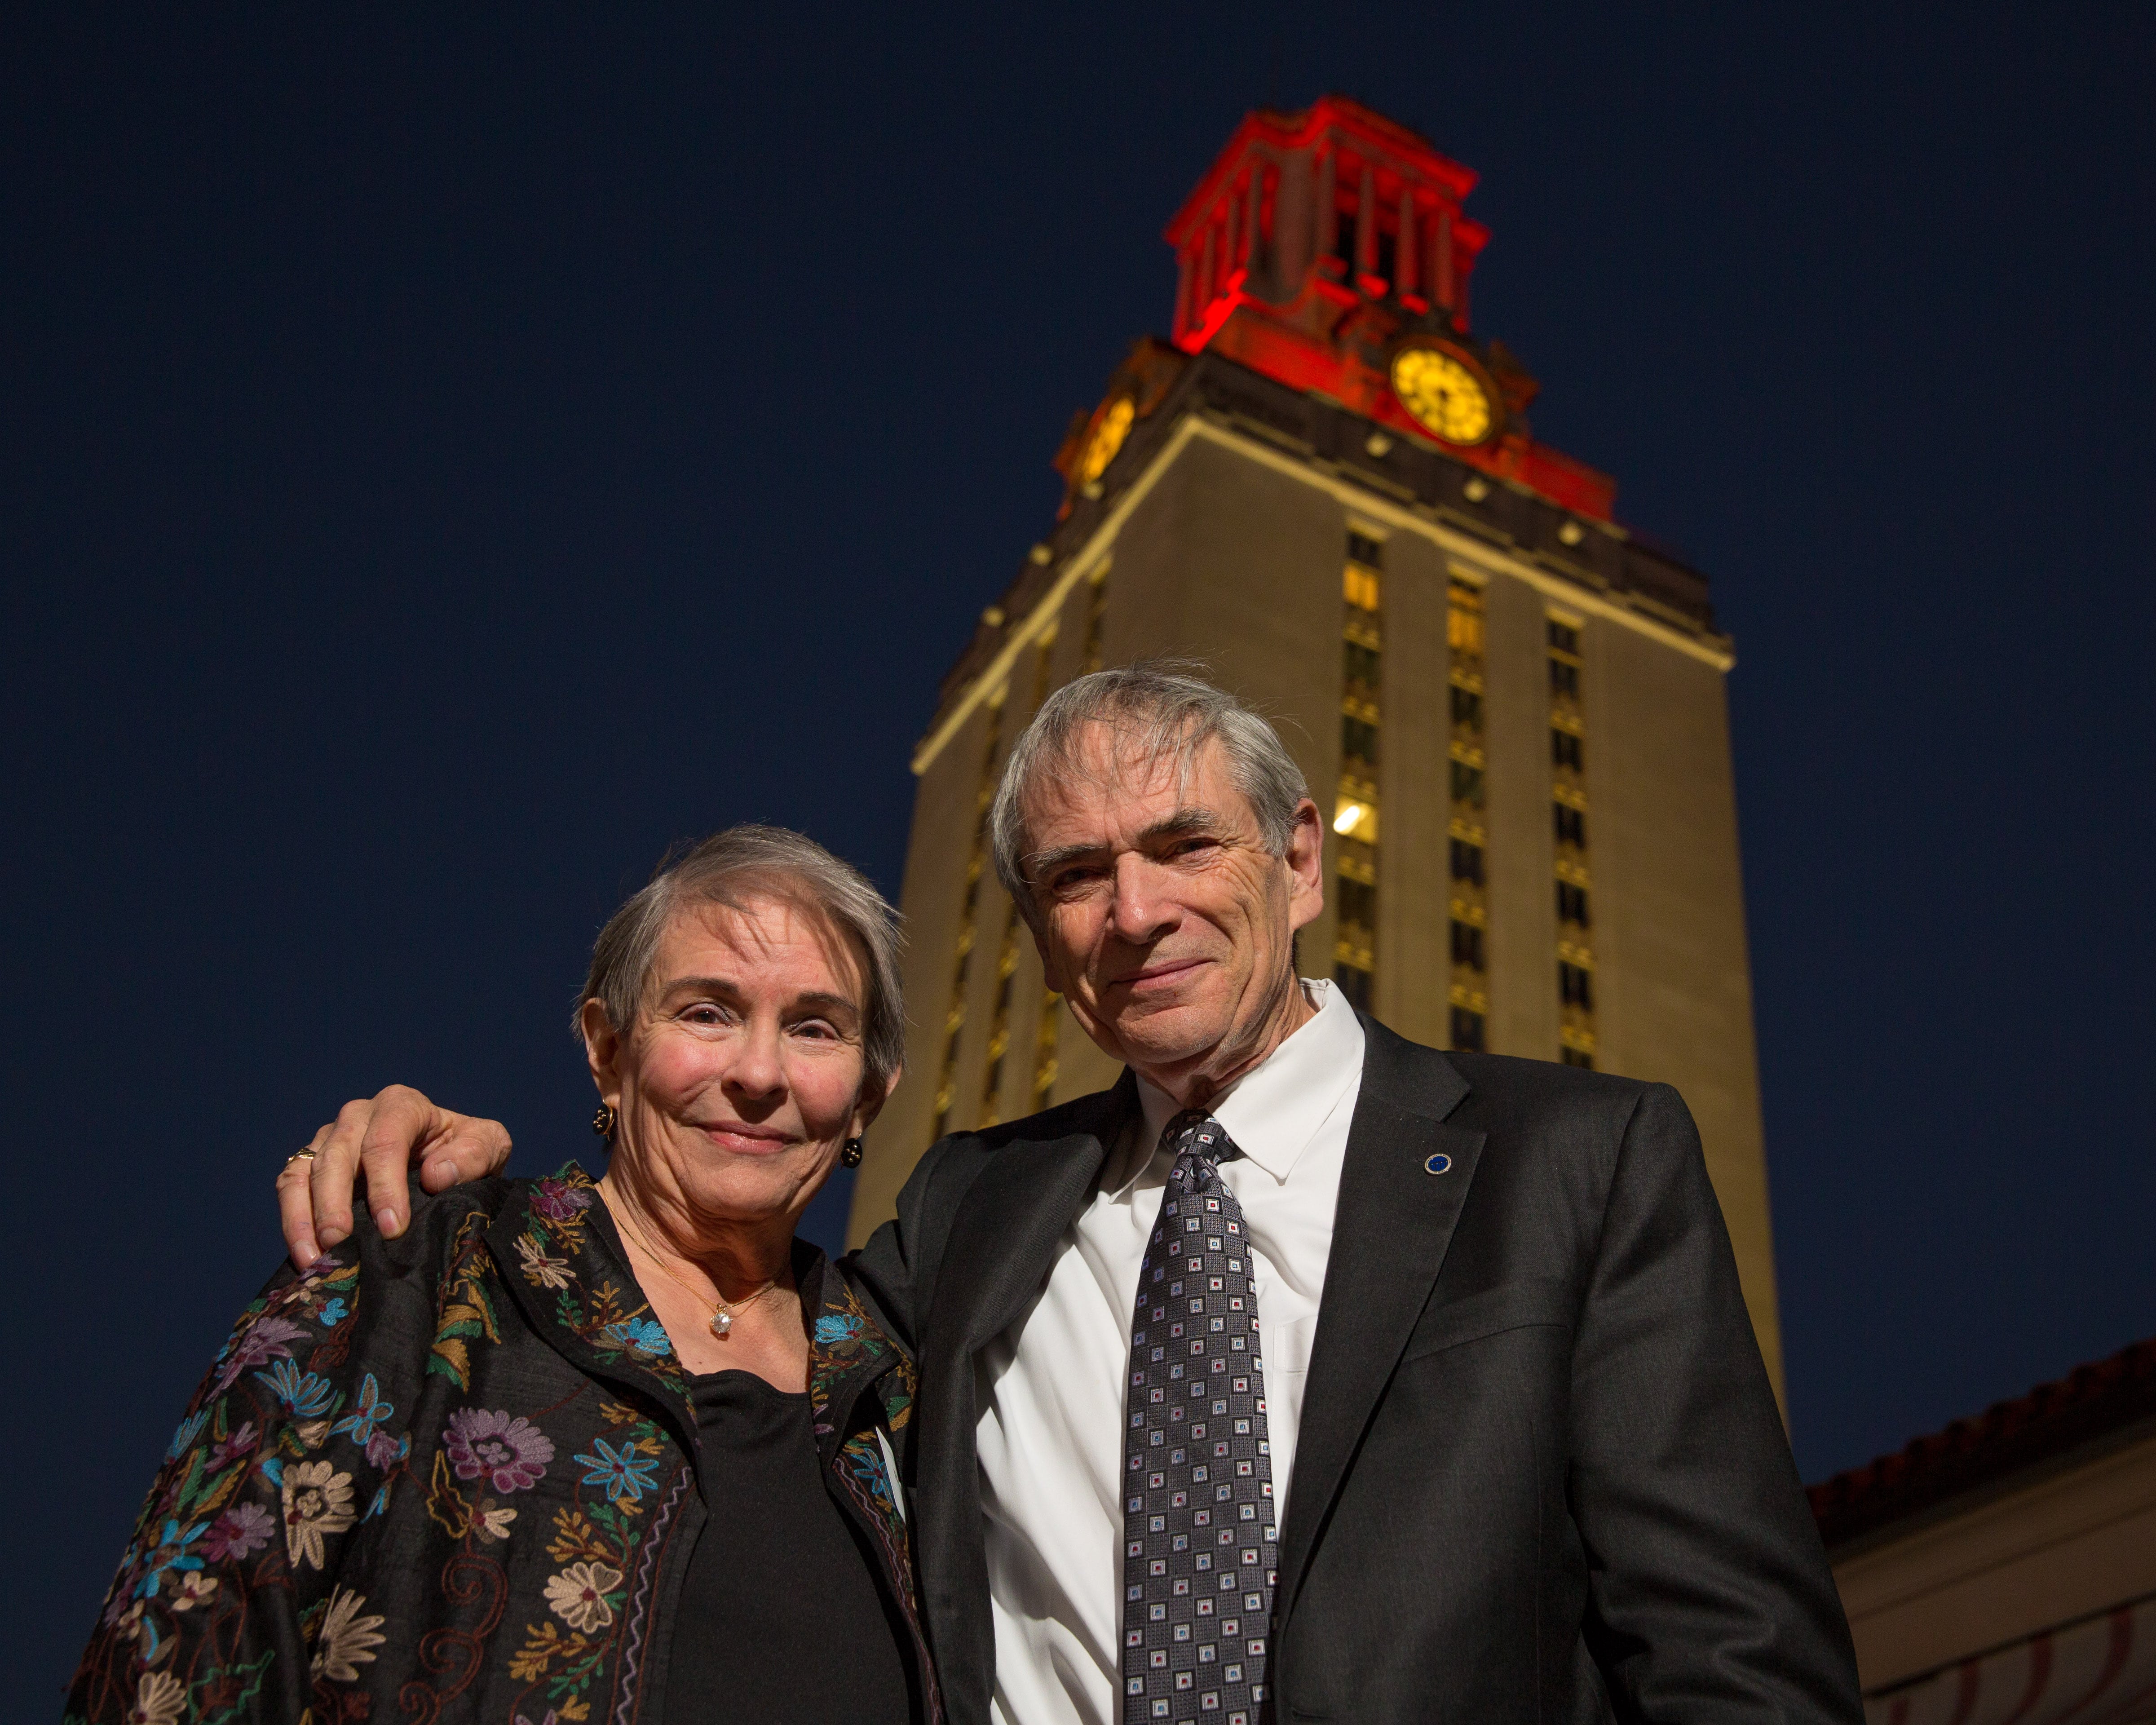 J. Tinsley Oden and his wife Barbara smiling in front of UT Tower lit up at night